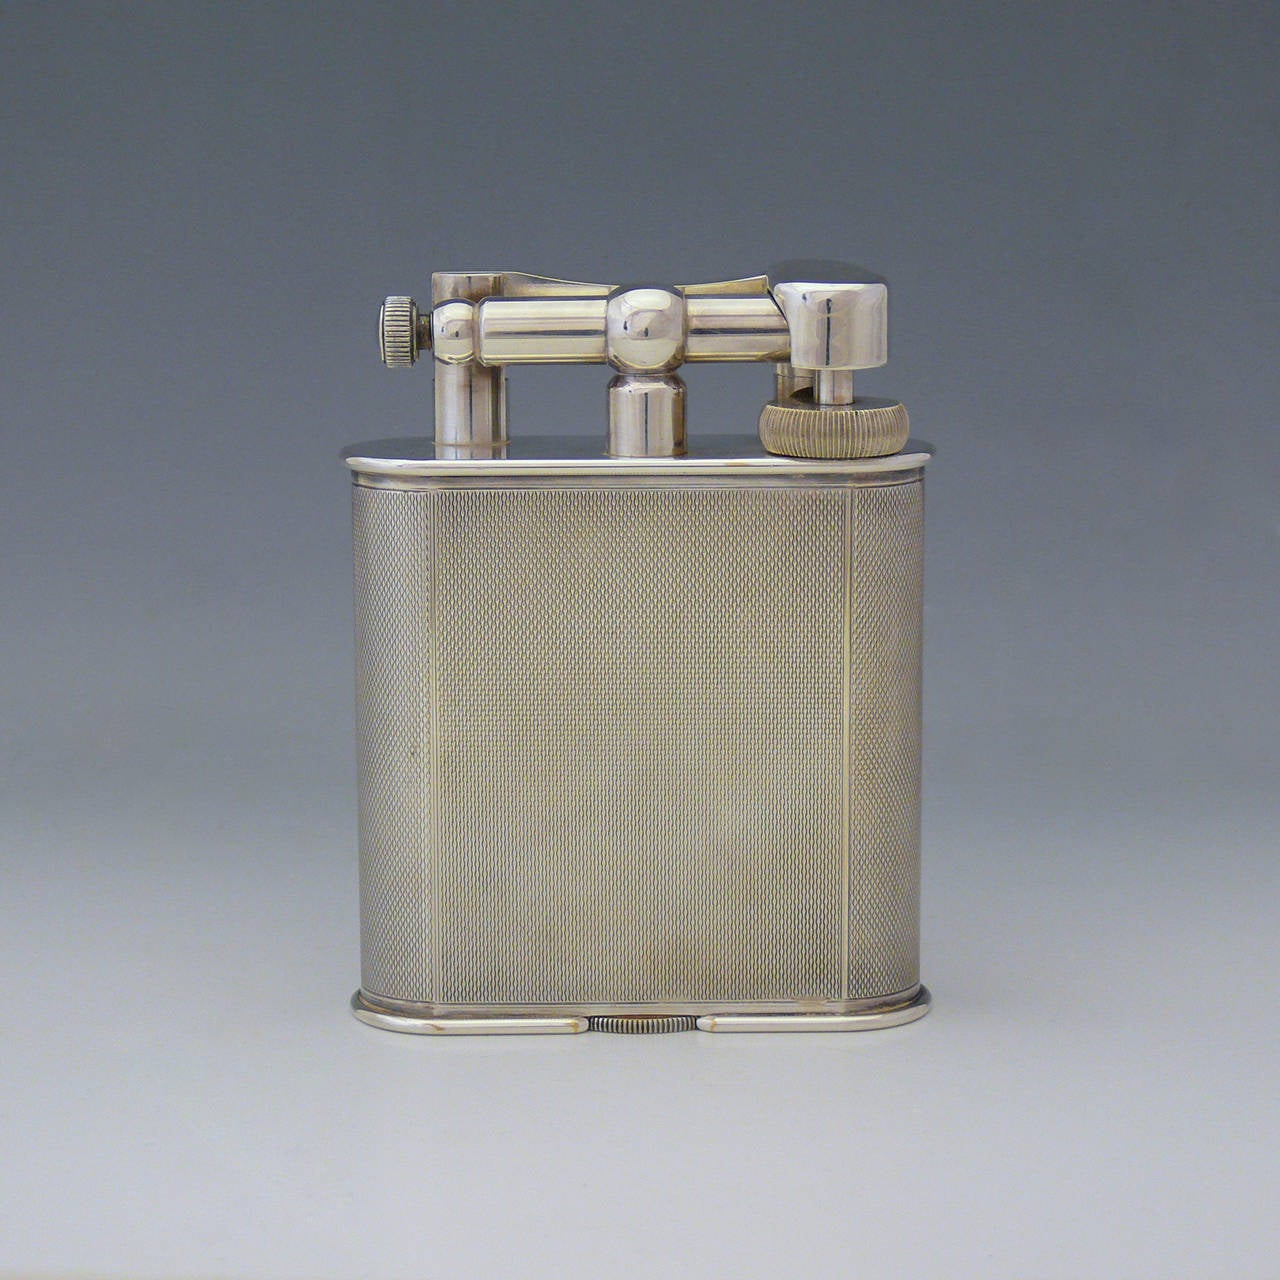 An excellent Dunhill 'Giant' lighter in engine turned silver plate, circa 1950. Fully serviced by Dunhill.

Dimensions: 8 cm (width) x 10.5 cm (height).

Member of LAPADA.